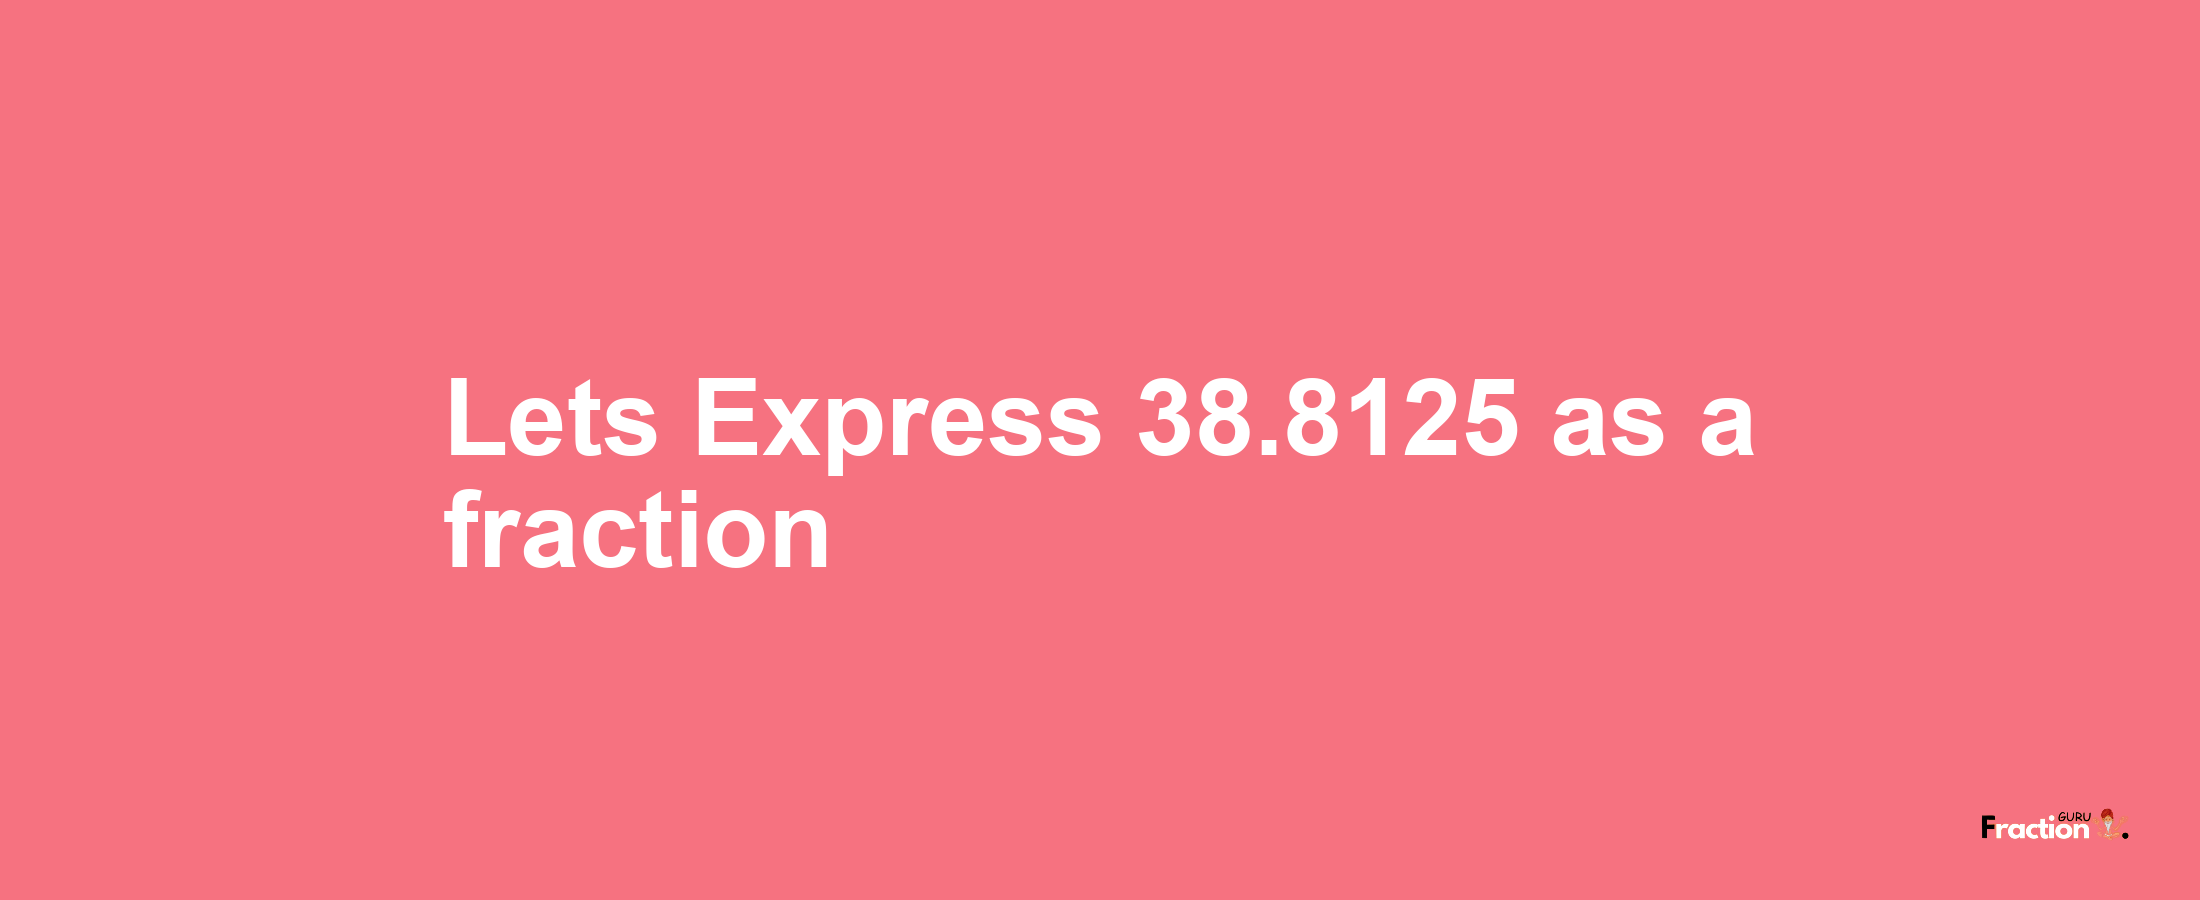 Lets Express 38.8125 as afraction